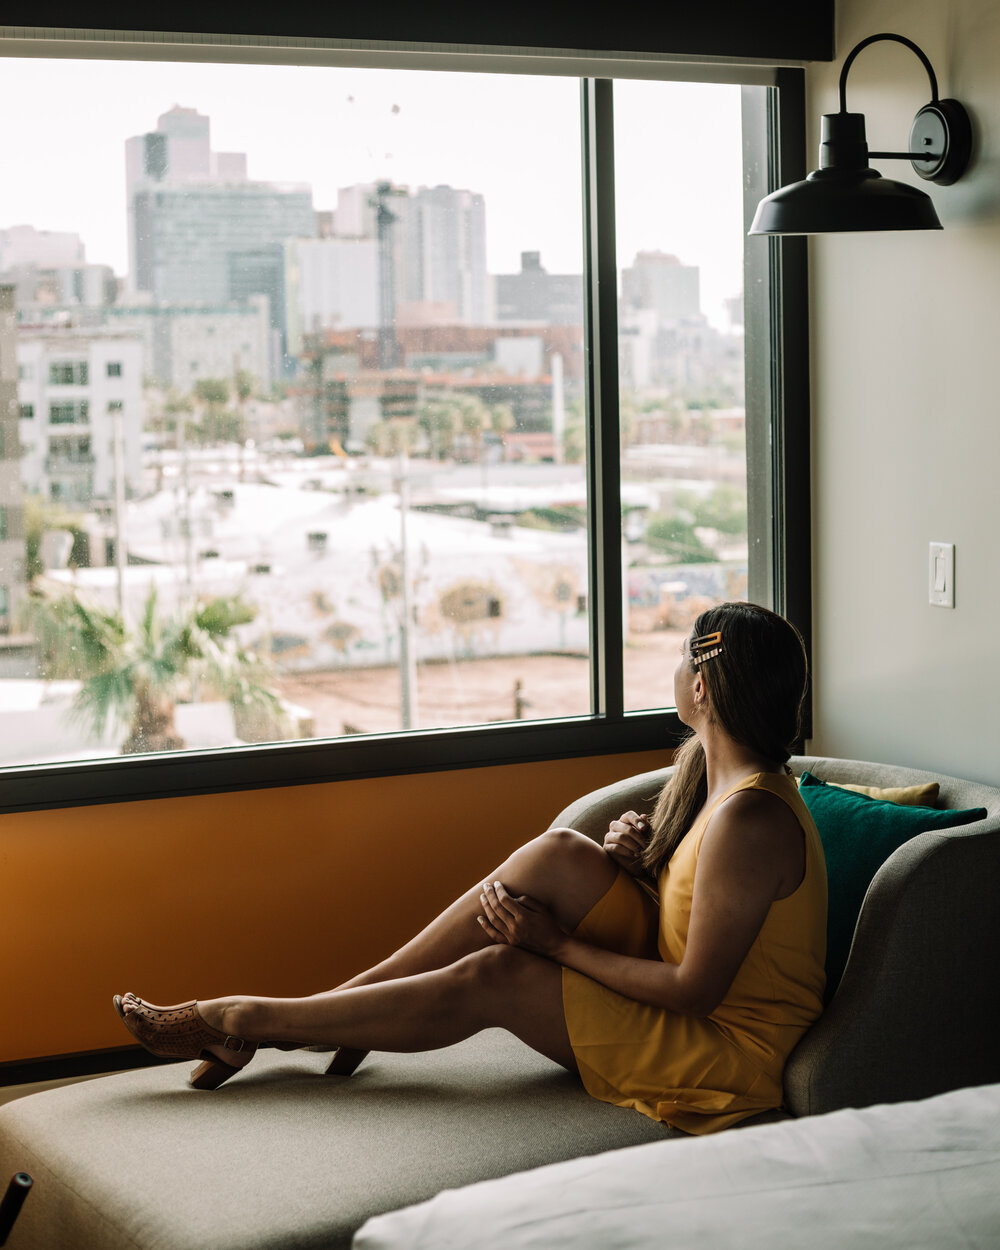 Rachel Off Duty: A Woman in a Yellow Dress Admiring the Hotel Room View